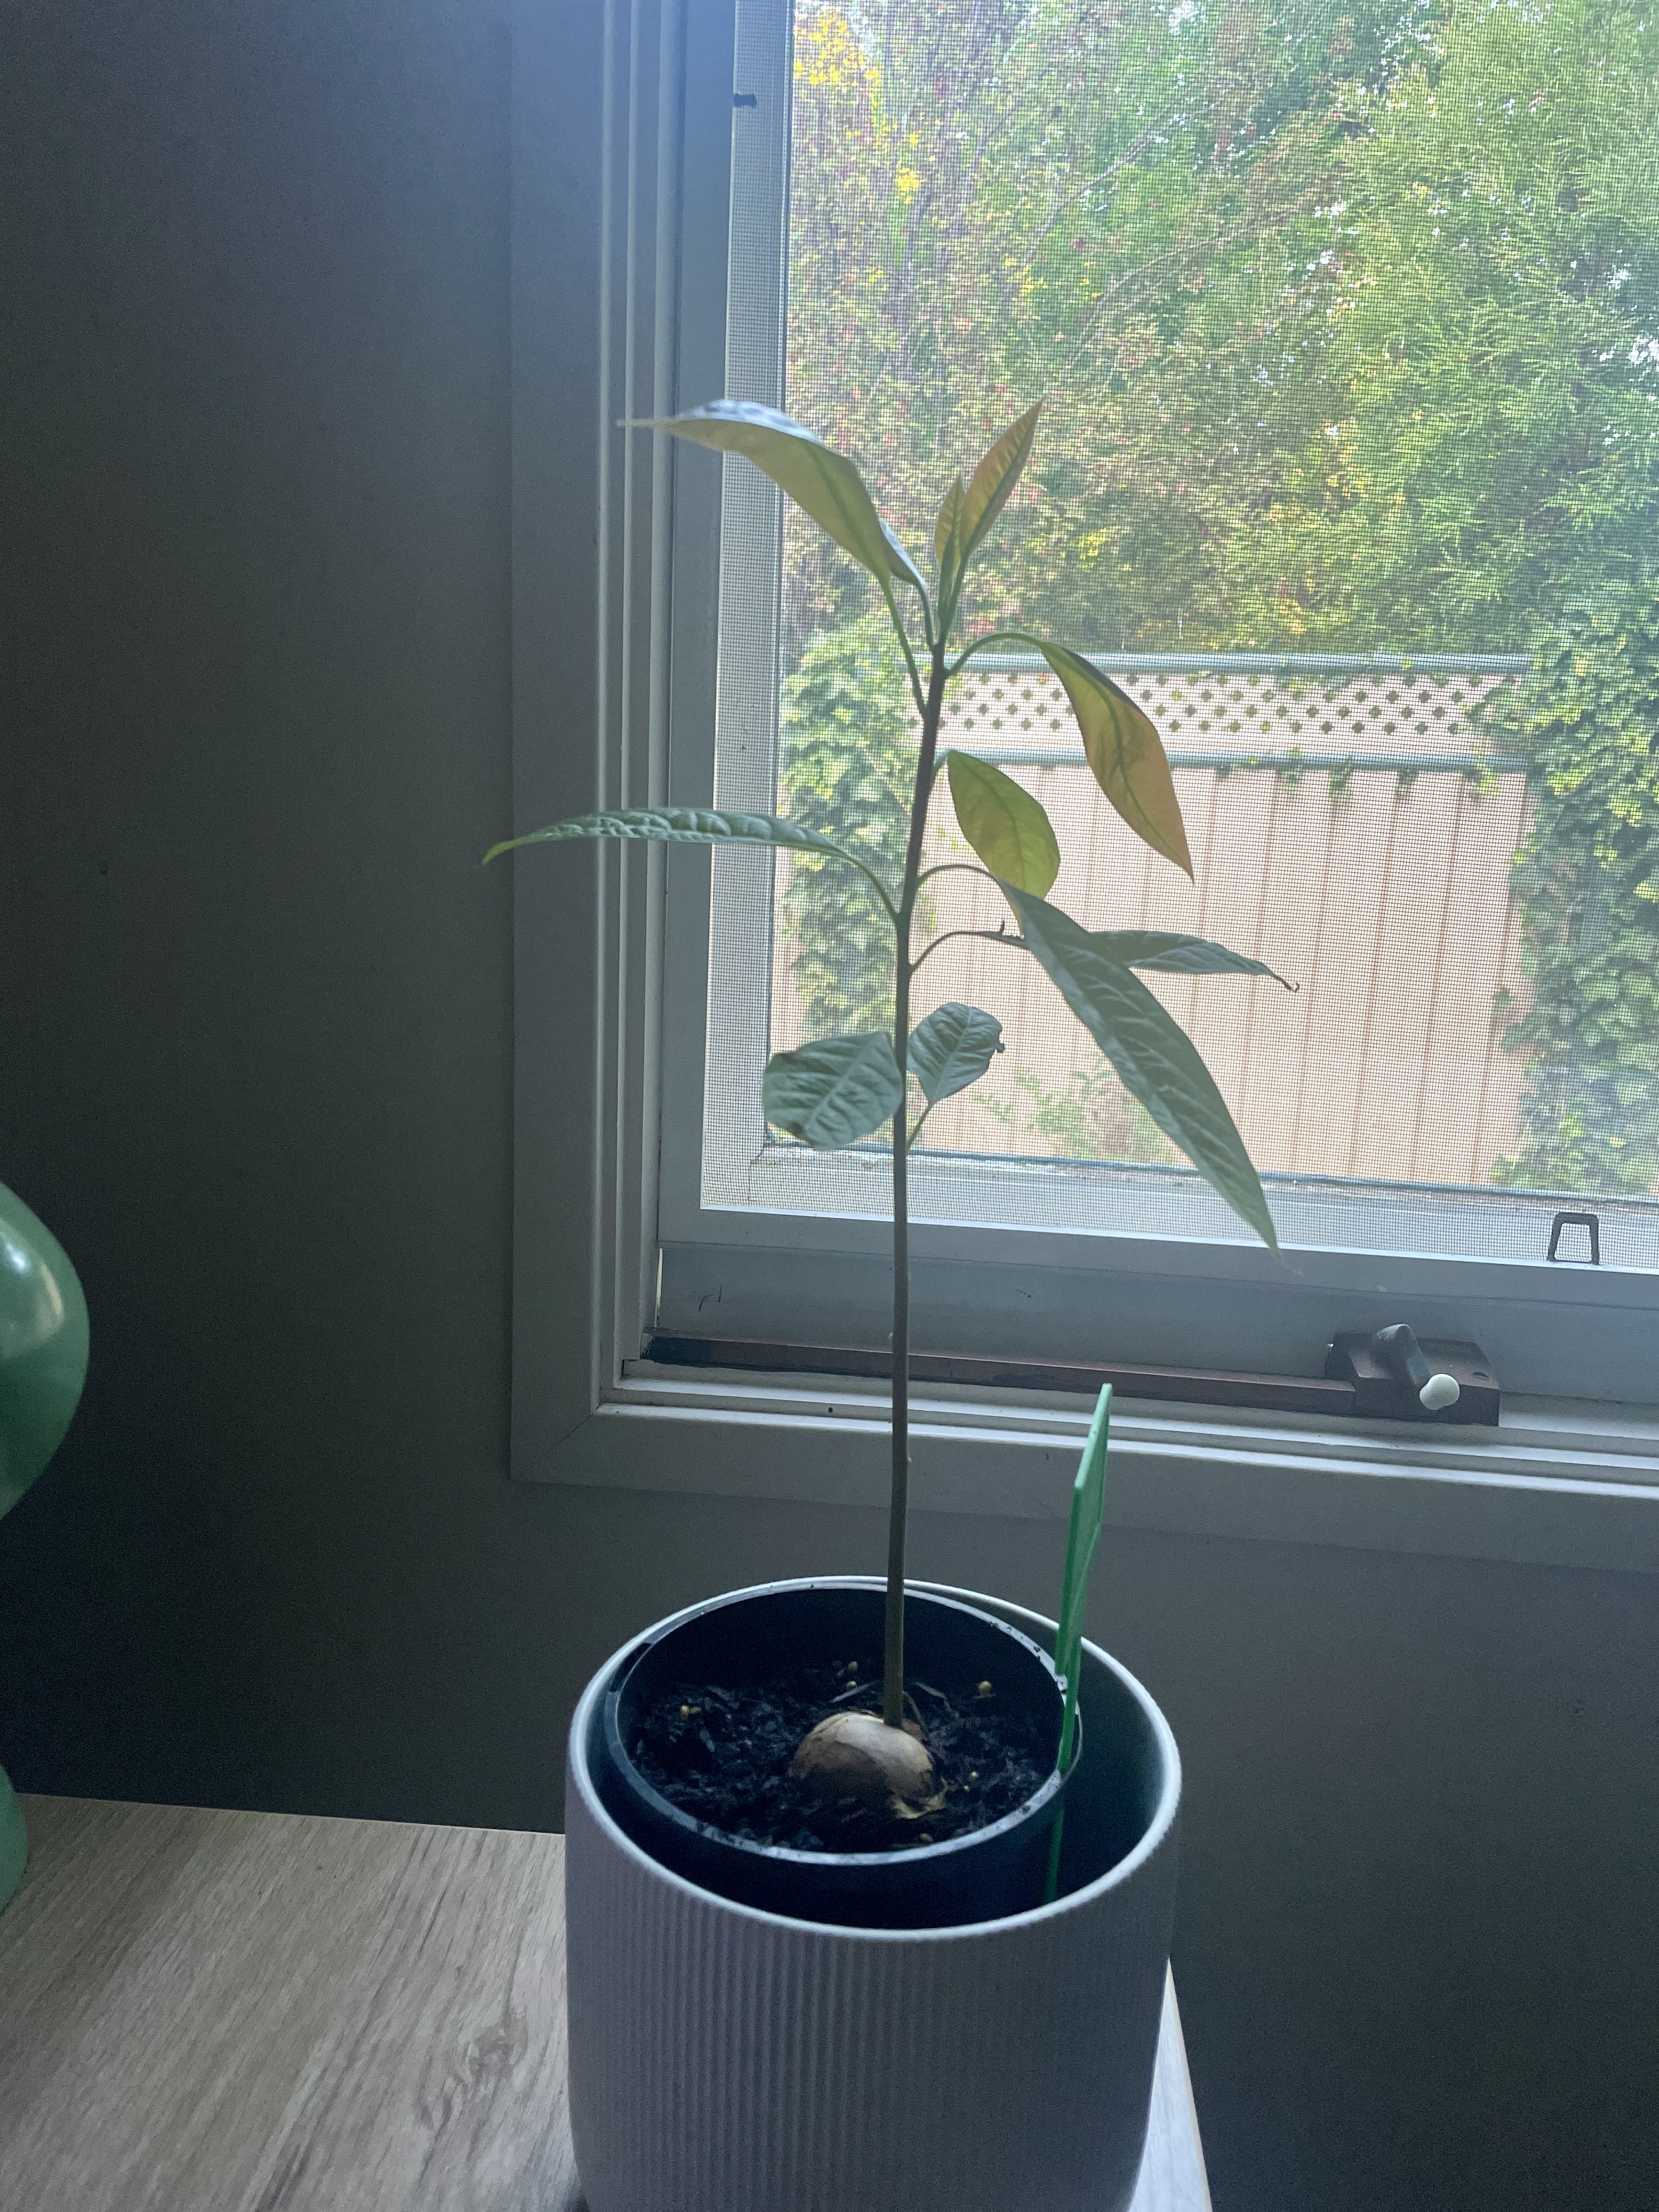 A small avocado plant with a few leaves of new growth